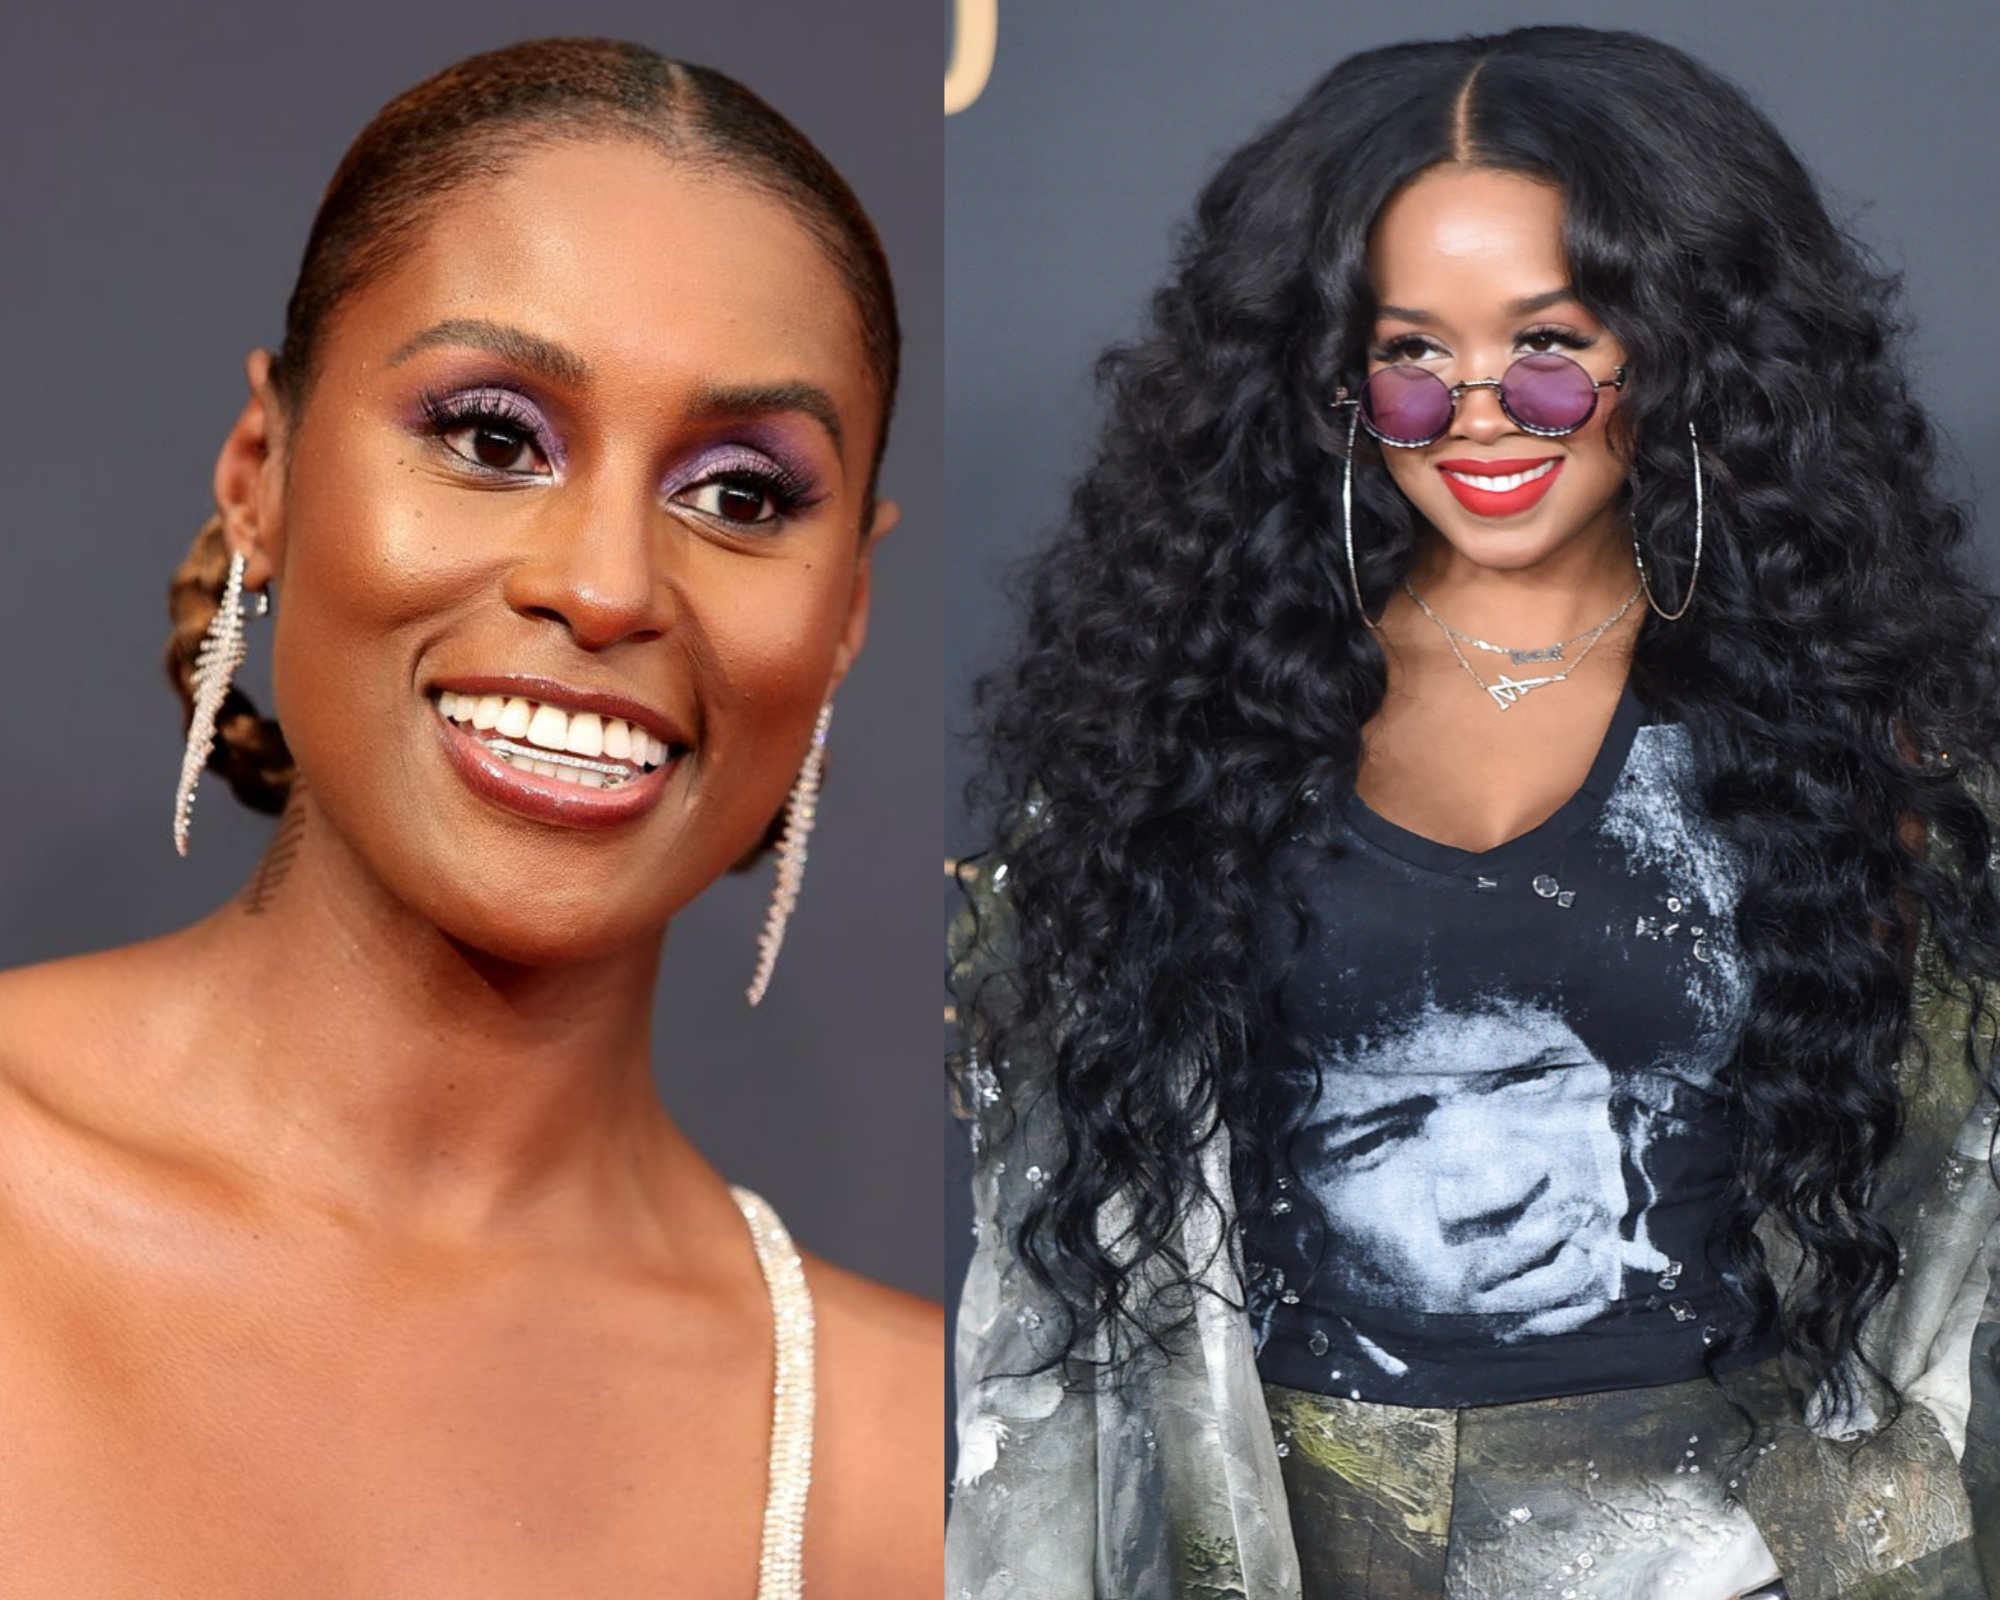 Black Girl Magic: Issa Rae and H.E.R. Lead The 53rd NAACP Image Awards Nominations